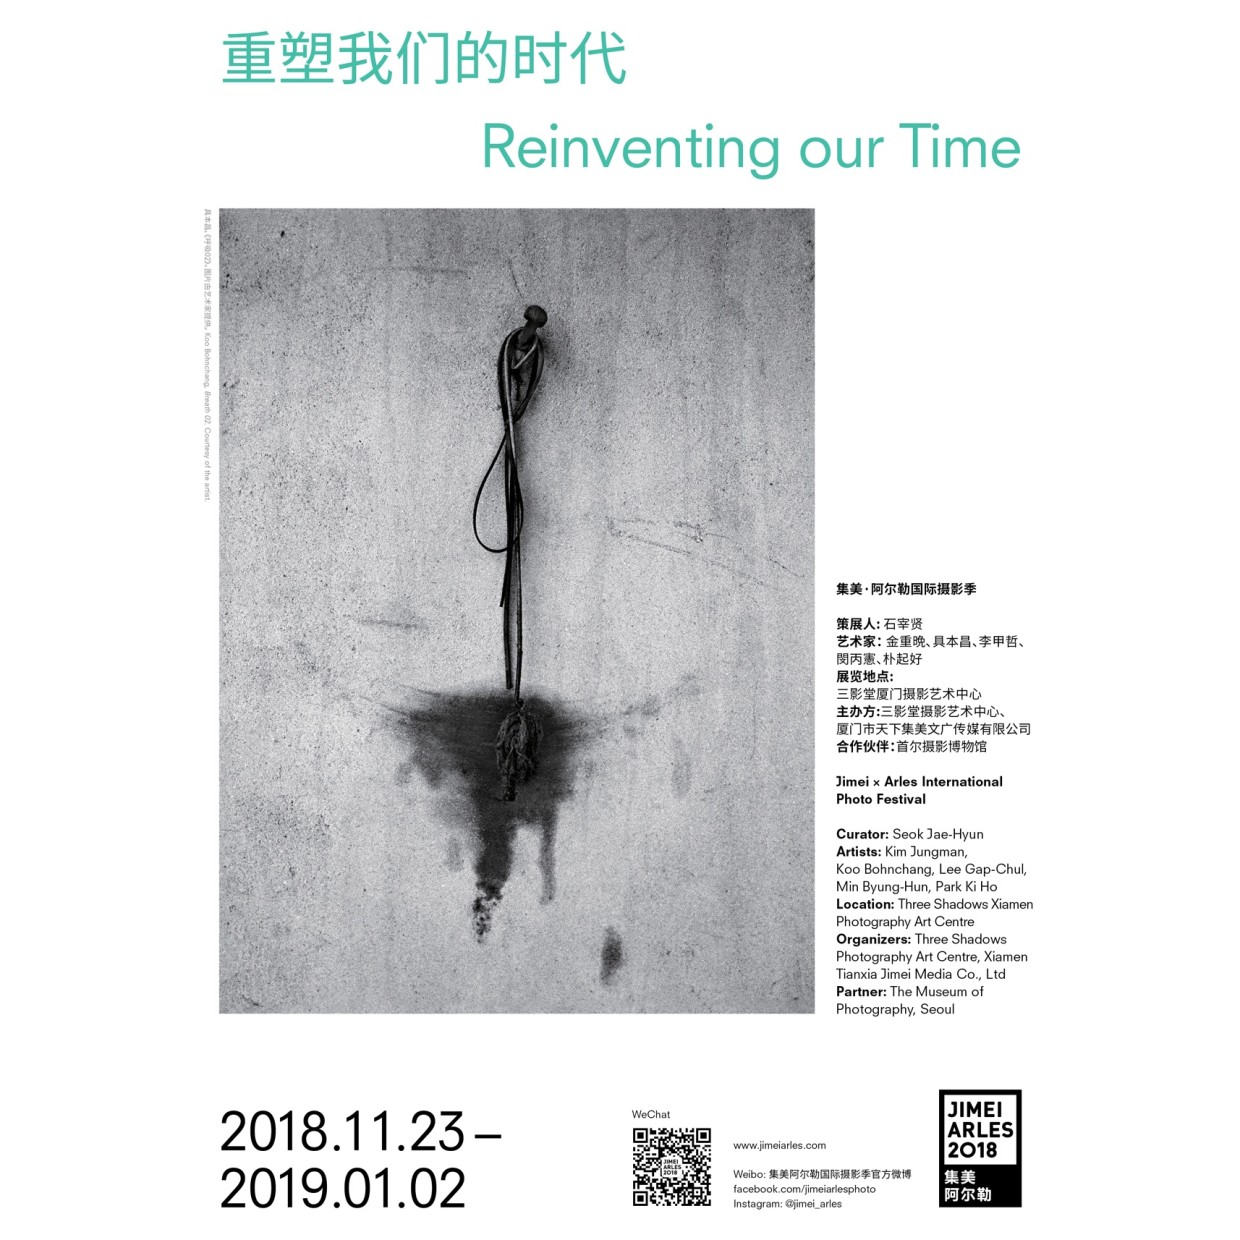 REINVENTING OUR TIME KIM JUNGMAN, KOO BOHNCHANG, LEE GAP-CHUL, MIN BYUNG-HUN AND PARK KI HO CO-CURATED BY KIM SUNYOUNG AND...